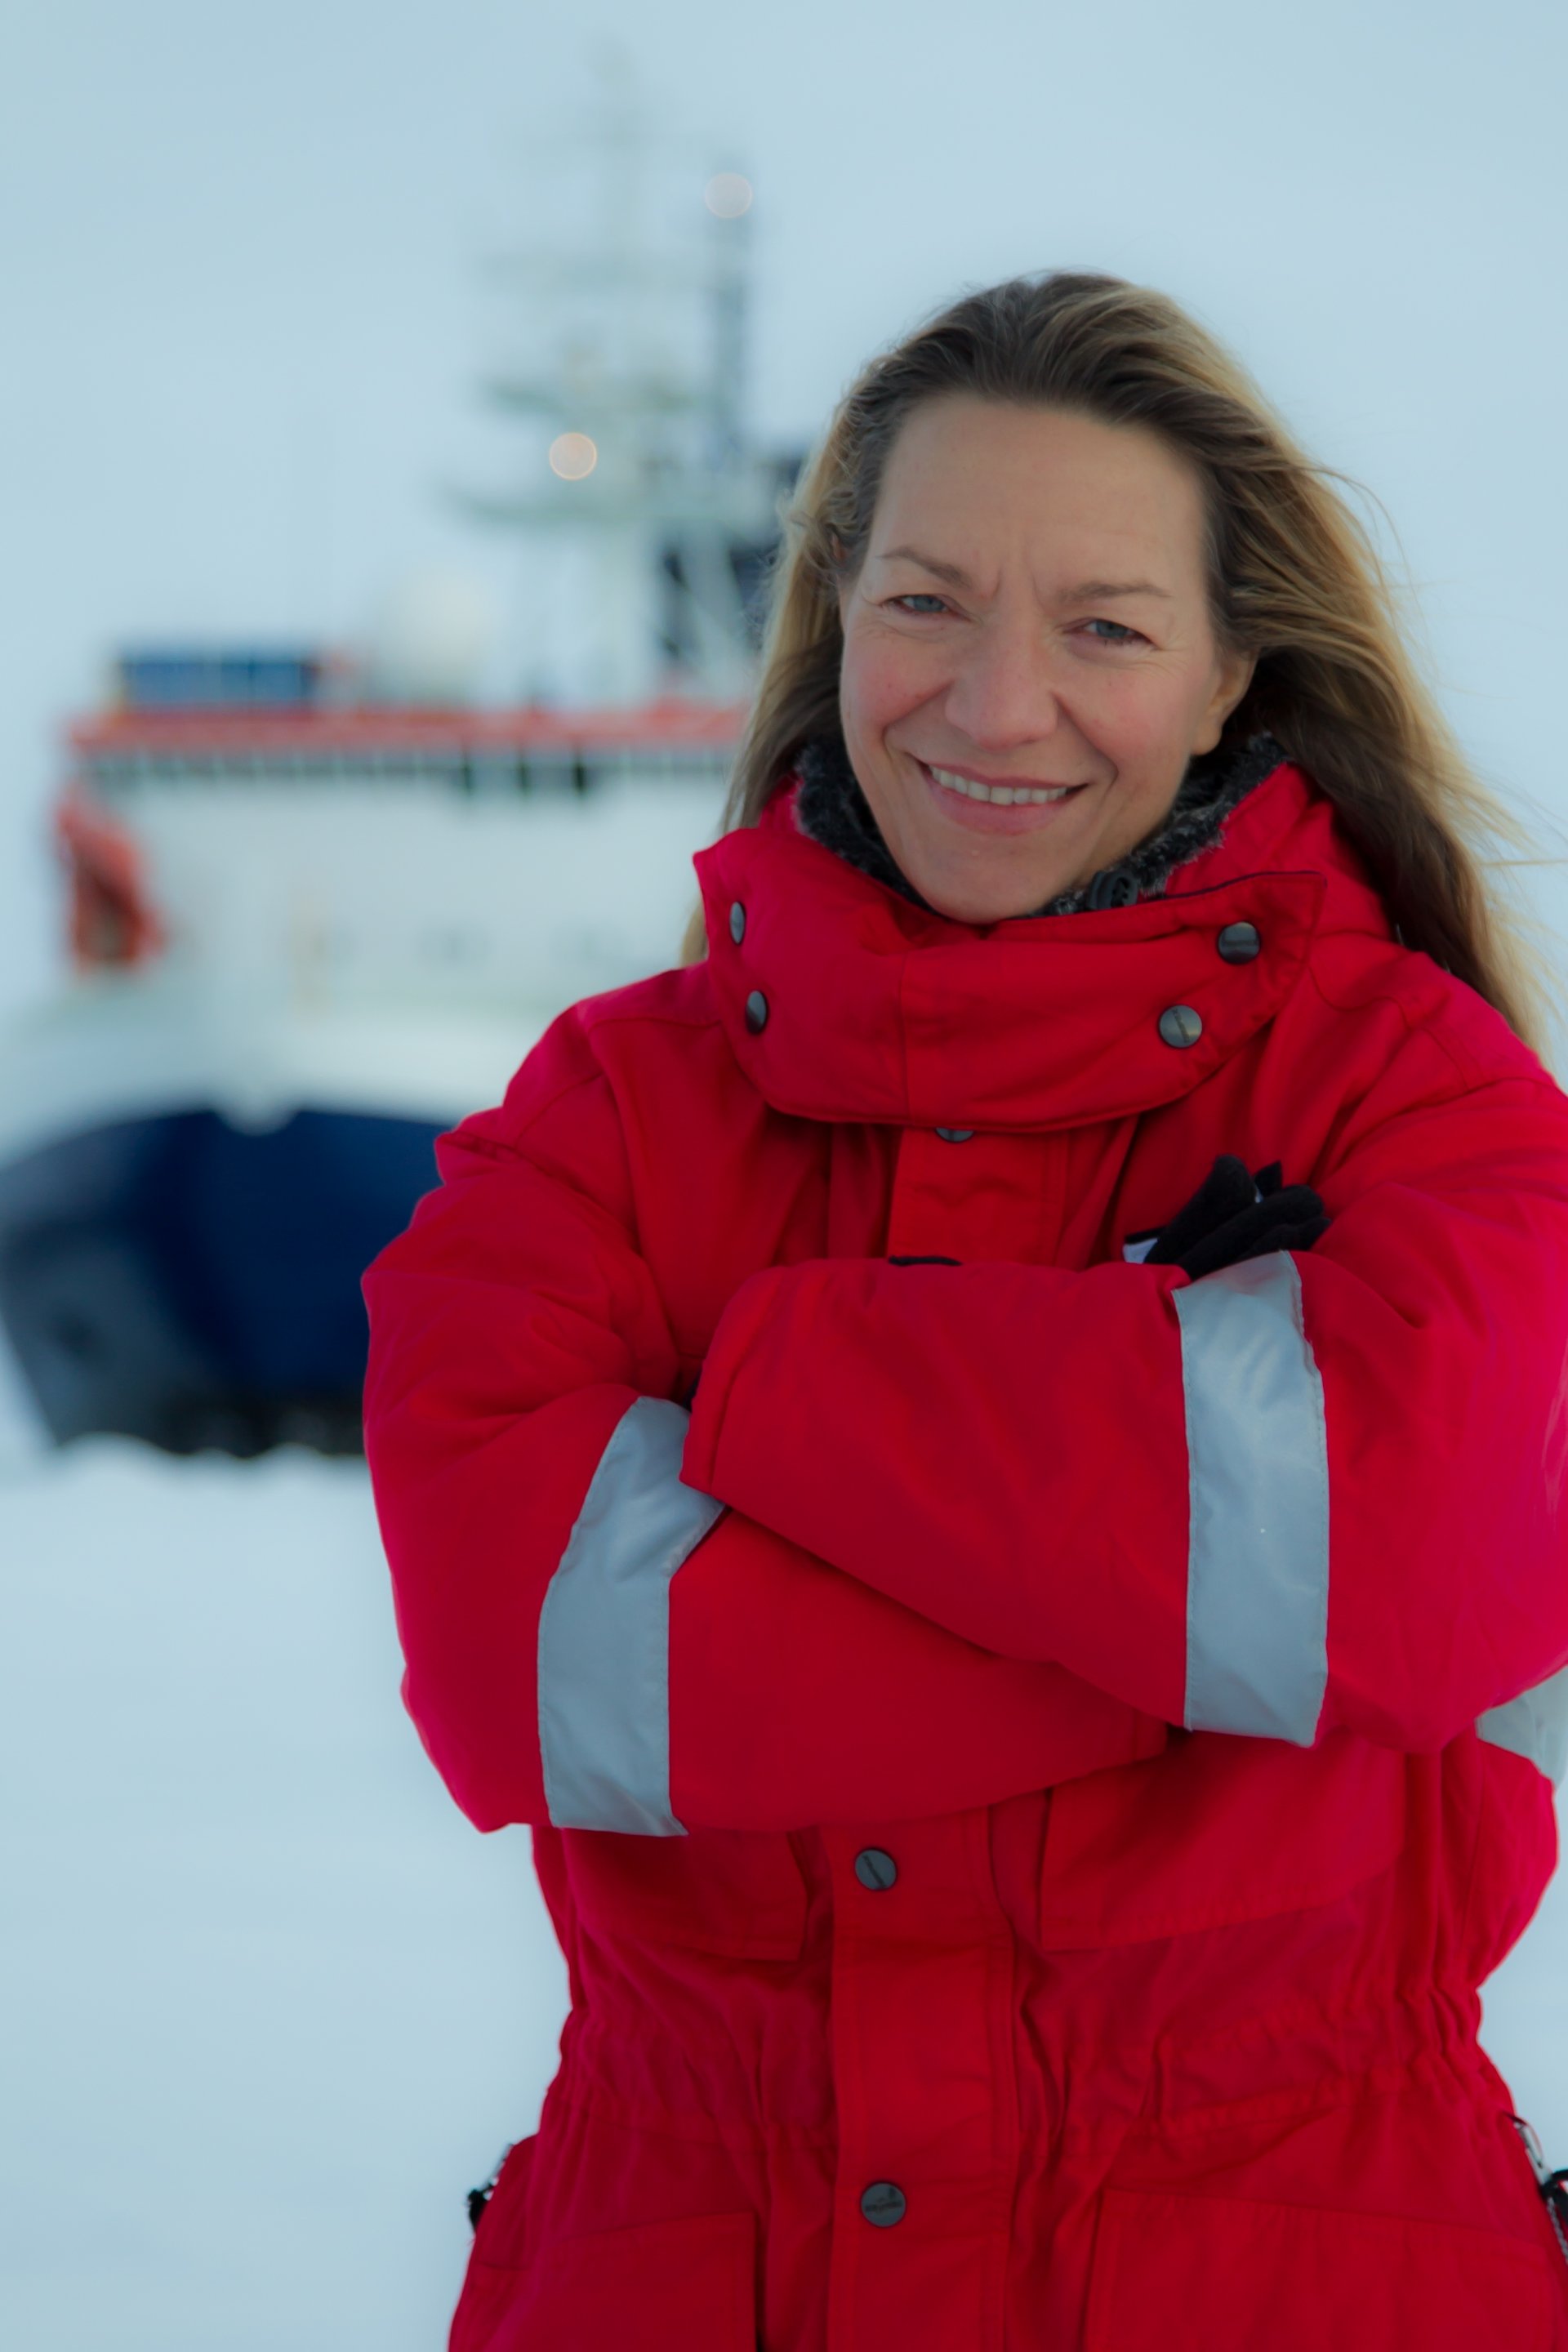 Prof. Dr. Antje Boetius, deep-sea and polar researcher at the Max Planck Institute and the Alfred Wegener Institute, on Arctic sea ice during an expedition with the research vessel Polarstern. (Alfred Wegener Institute / Martin Schiller)